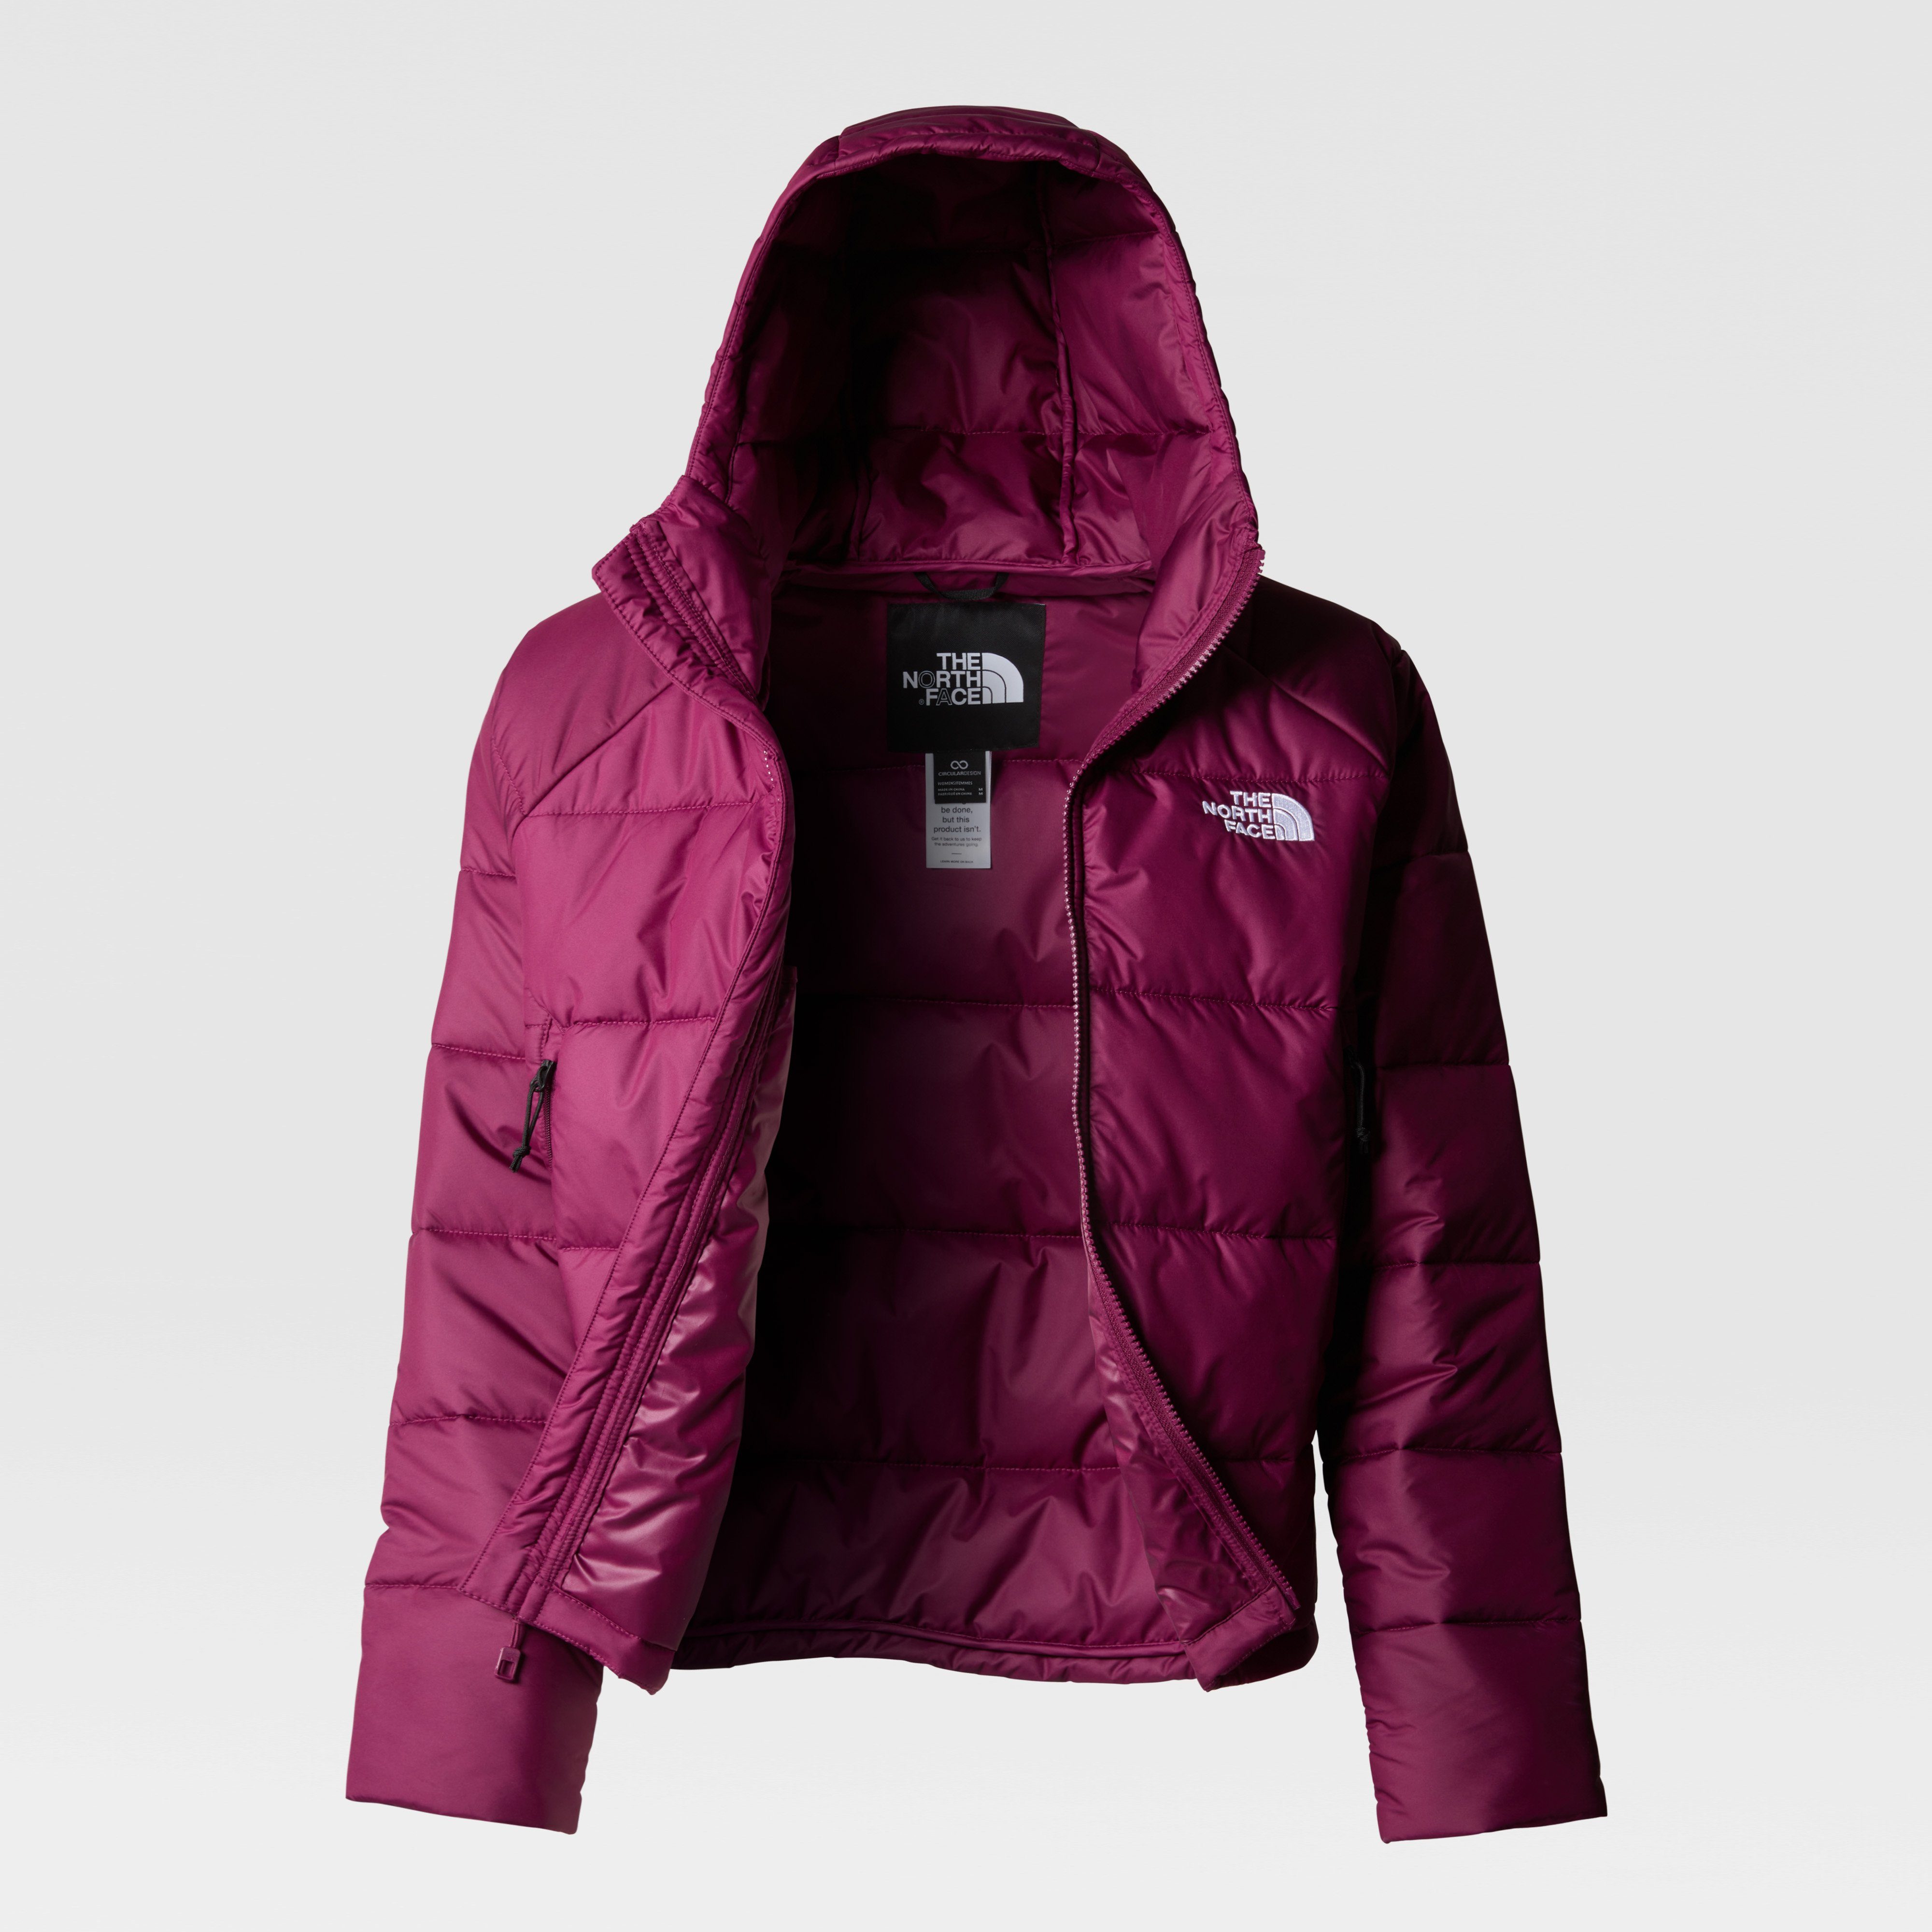 The North Face Logodruck SYNTHETIC Funktionsjacke HYALITE red W mit HOODIE